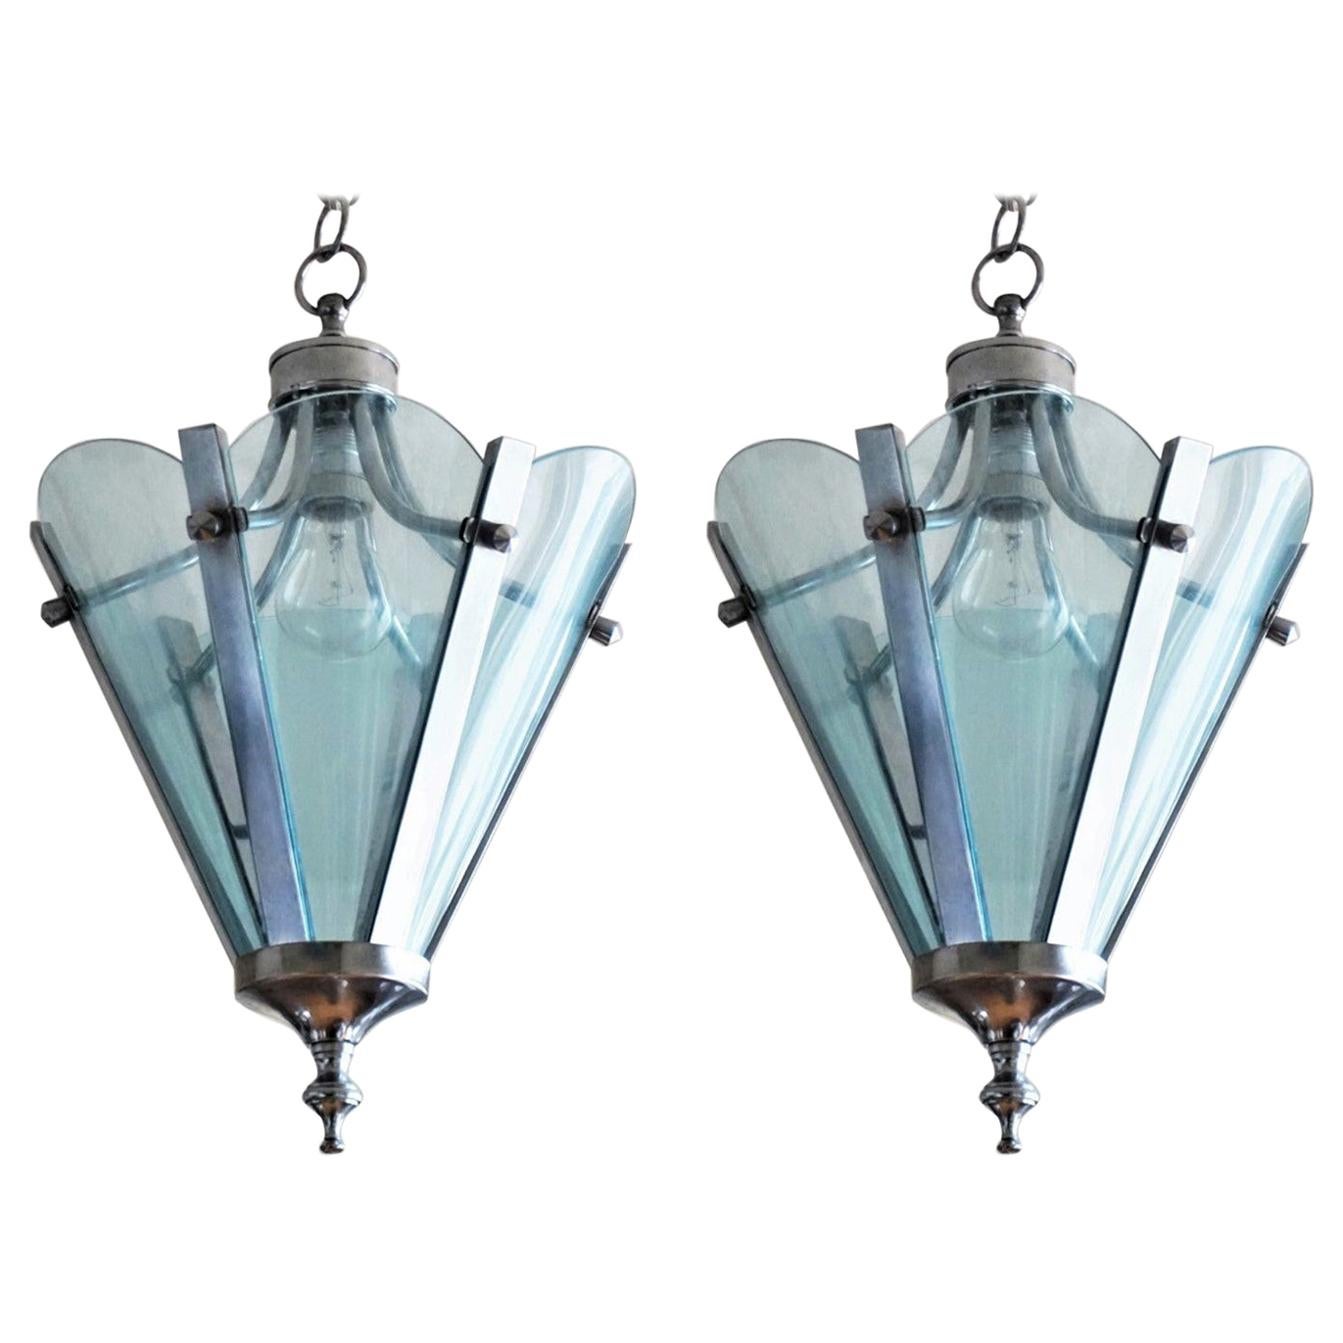 Pair of Mid-Century Modern lanterns, Italy, circa 1960-1969. Hexagonal structure in chromed metal frame with six azure blue transparent acrylic panels. Each lantern with one brass and ceramic E27 socket, rewired. 
In good original condition, some